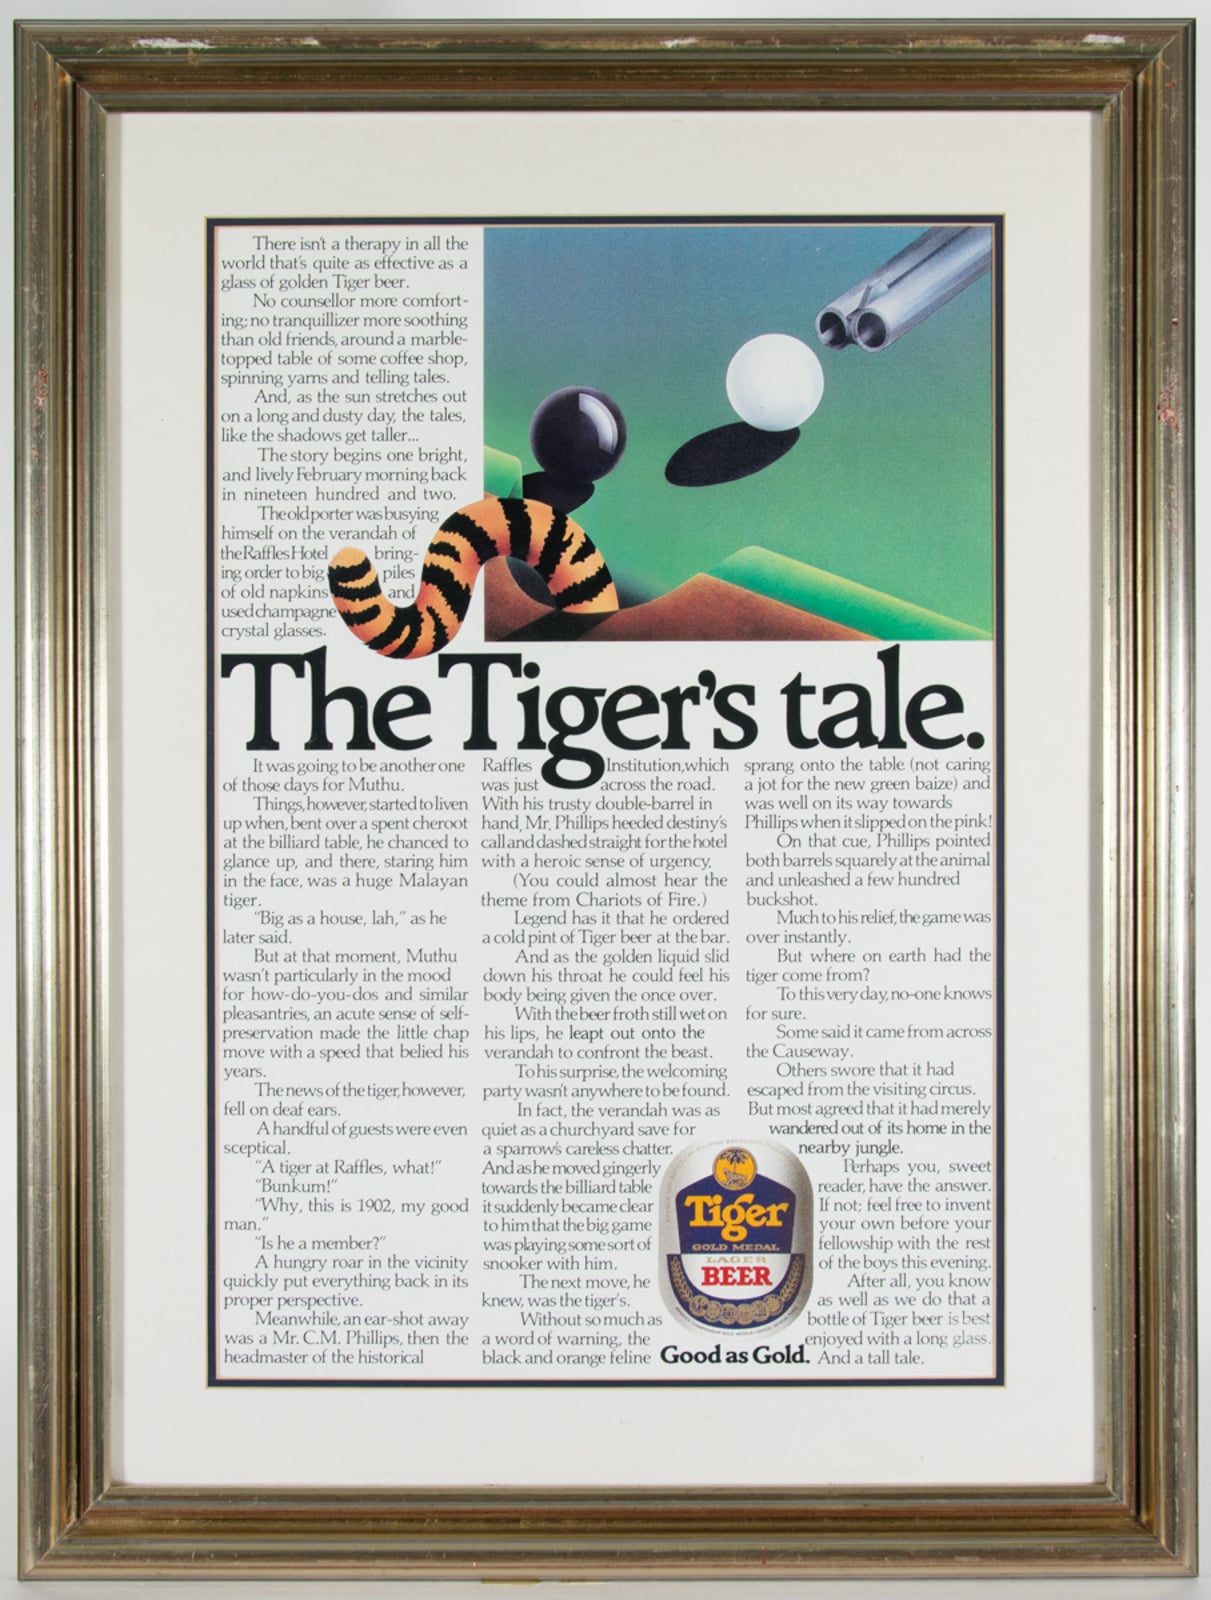 The Tiger's Tale Advertisement